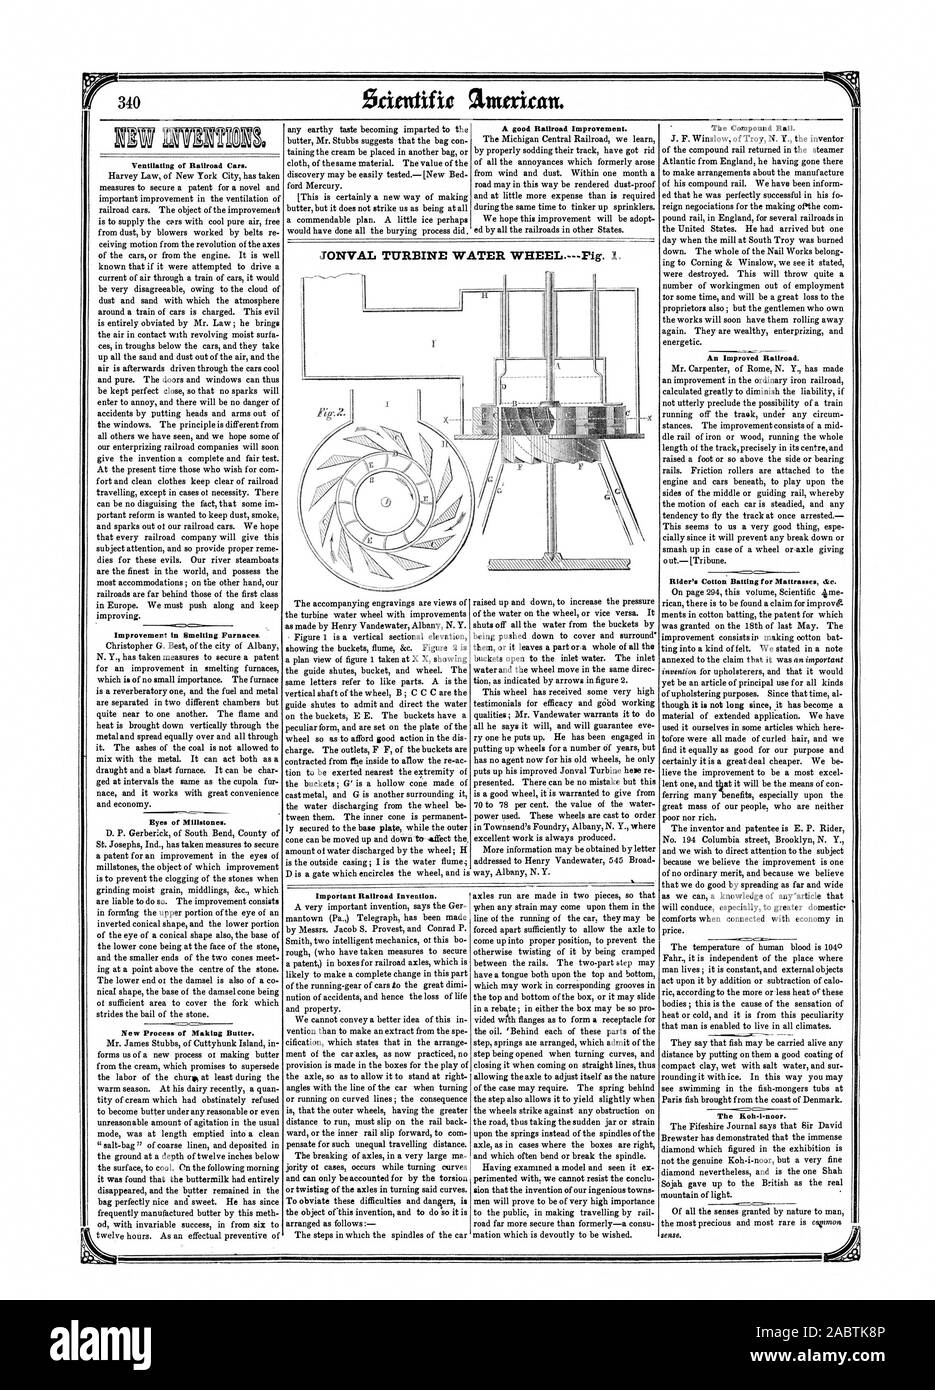 JONVAL TURBINE WATER WHEEL. Fig. 1. Ventilating of Railroad Cars. Improvement in Smelting Furnaces Eyes of Millstones. New Process of Making Butter. Important Railroad Invention. The Compound Rail. An Improved Railroad. The Koh-imoor. A good Railroad Improvement., scientific american, 1852-07-10 Stock Photo